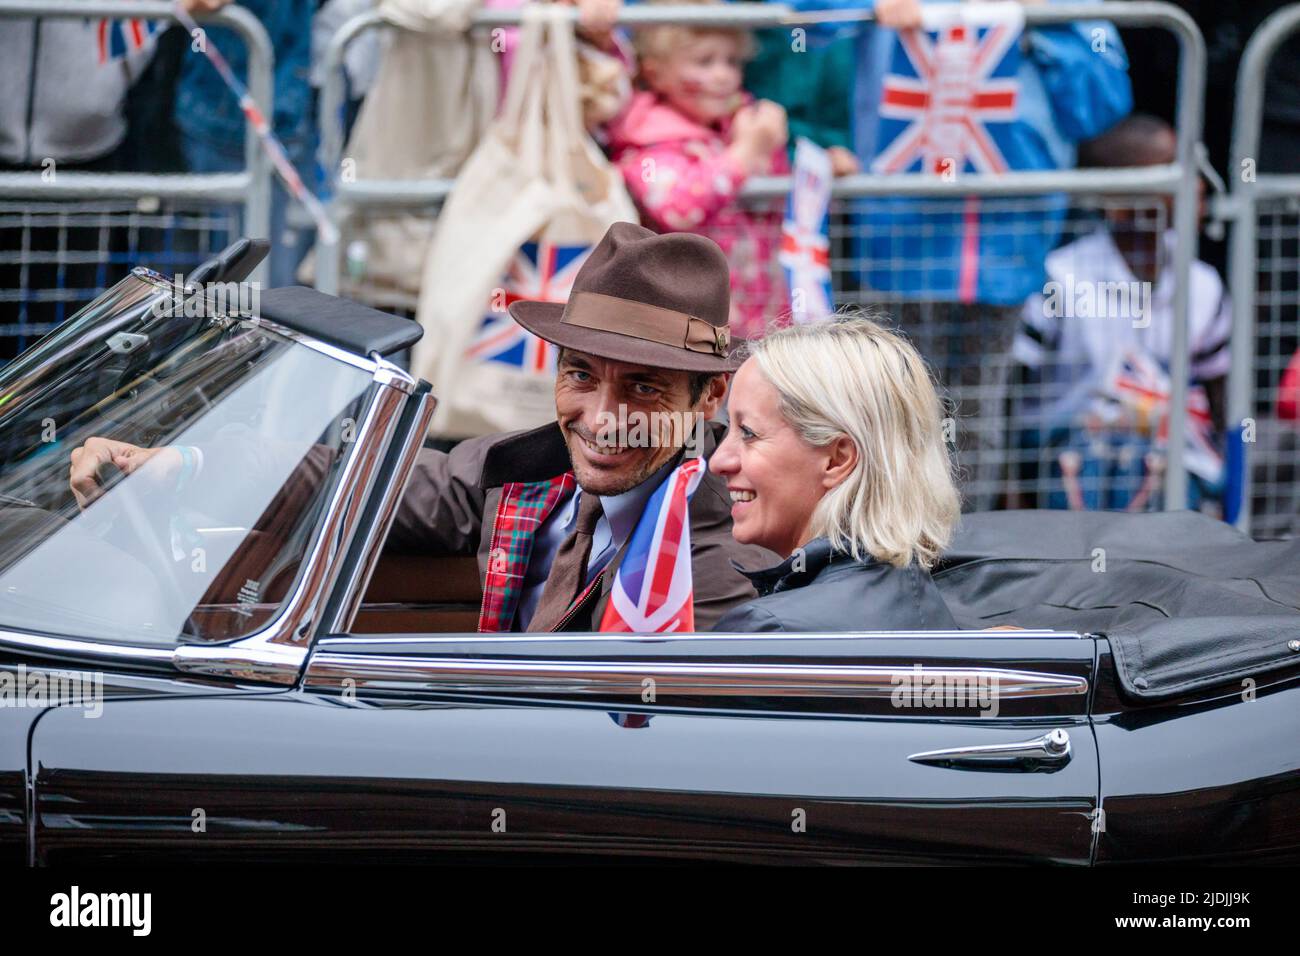 Model David Gandy at The Platinum Jubilee Pageant as it proceeds along Whitehall on the fourth and final day of the Queen’s Platinum Jubilee celebrati Stock Photo